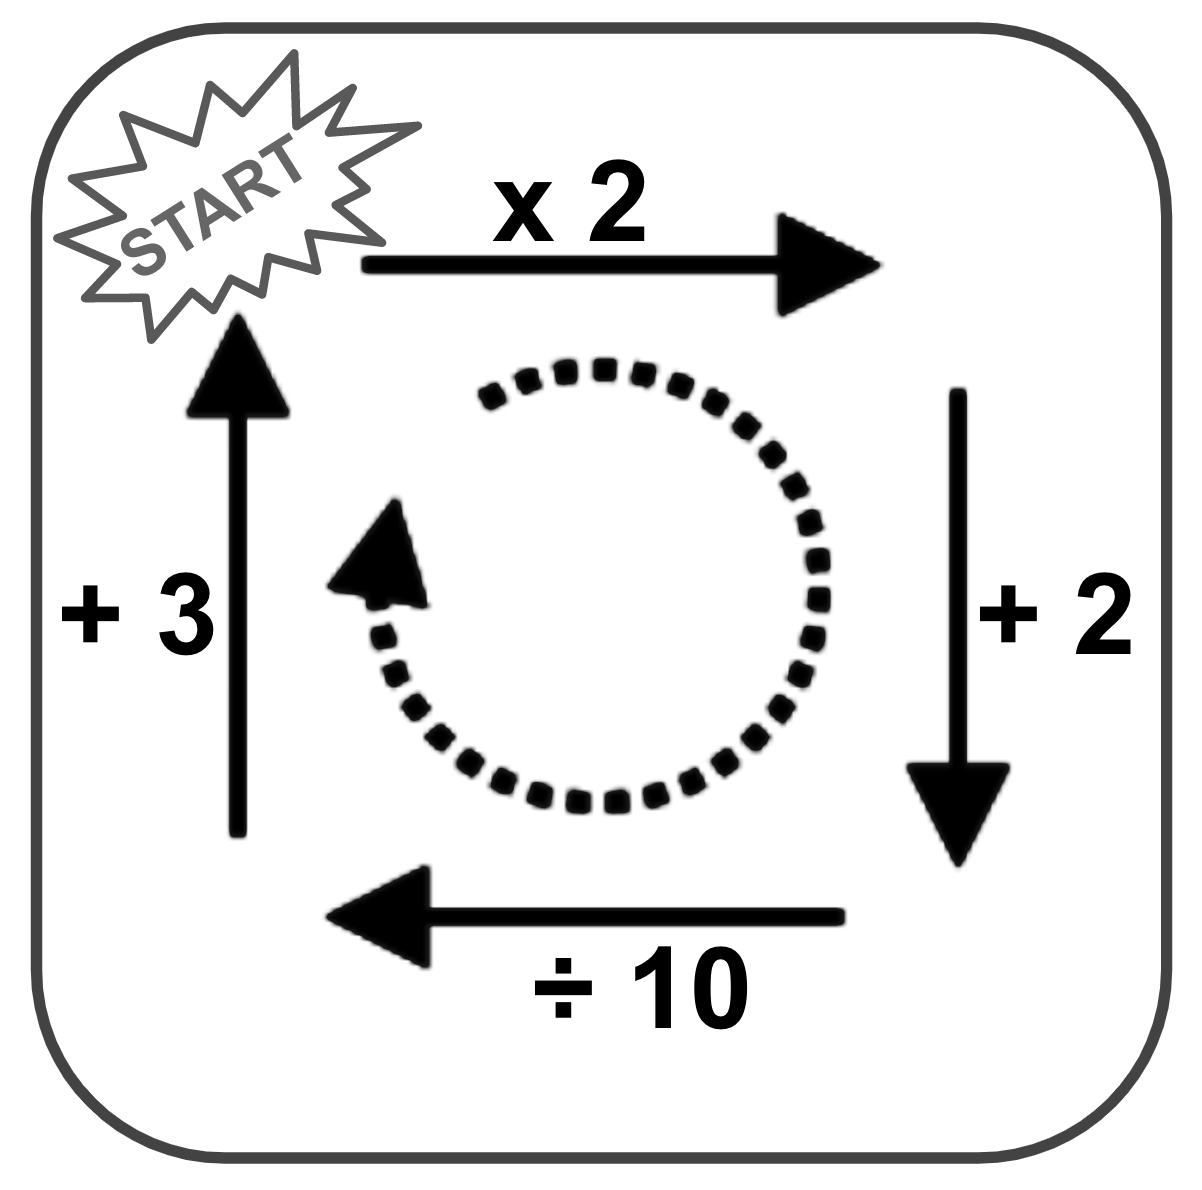 A "Stay the Same Puzzle" consisting of a large square outline containing a starting point in the top left corner, and four arrows labelled with math operations, leading back to the starting point. The first arrow is labelled x2, the second arrow is labelled +2 the third arrow is labelled /10, and the fourth arrow is labelled +3.